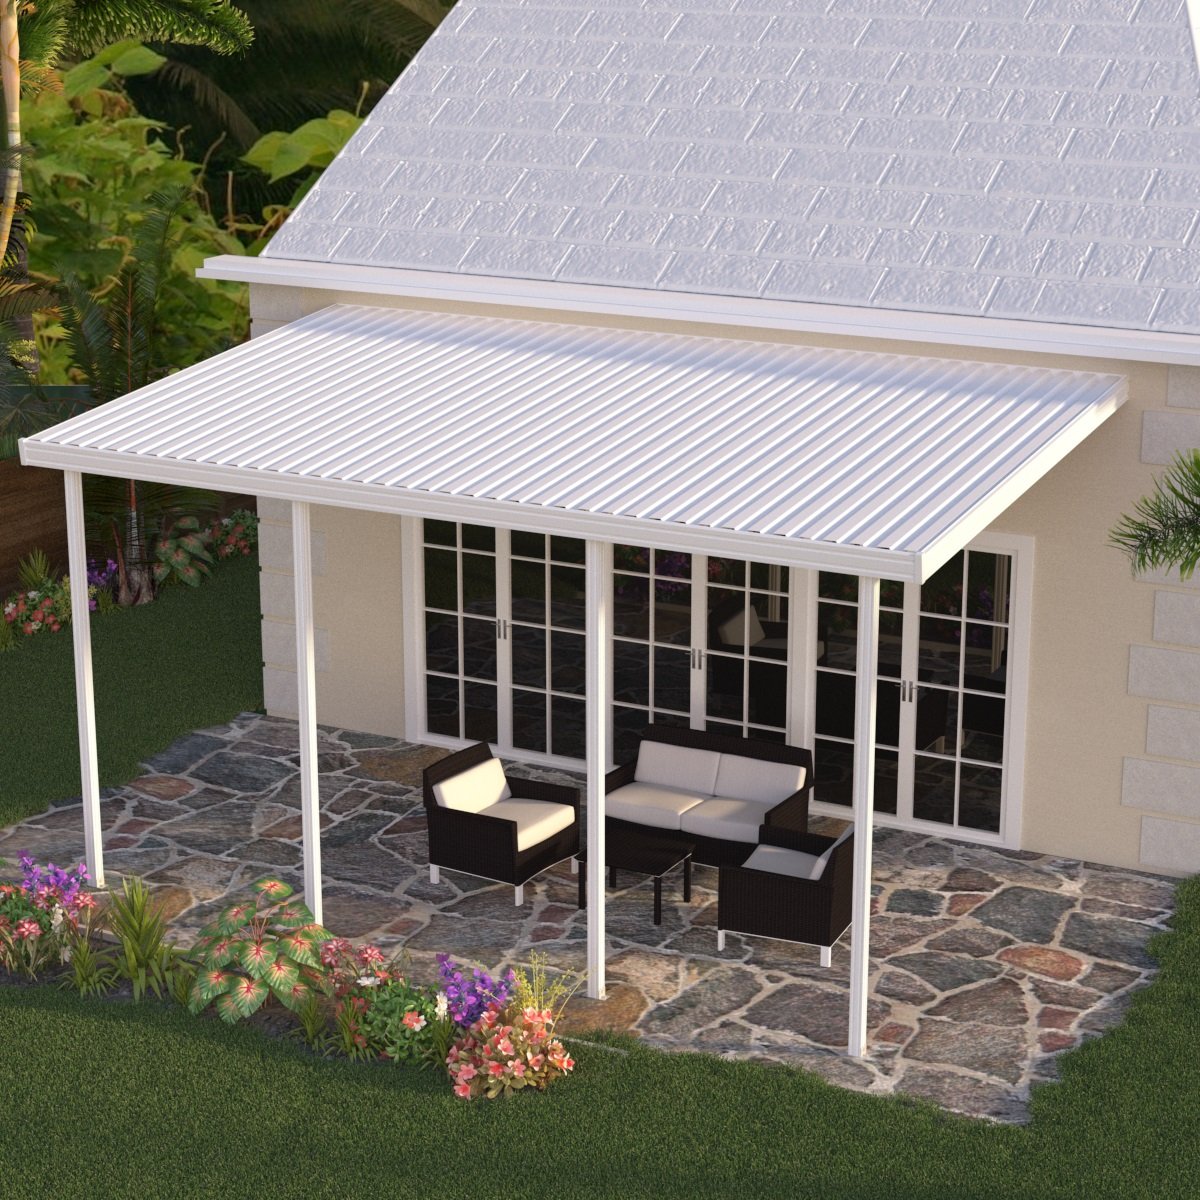 12 ft. Deep x 24 ft. Wide White Attached Aluminum Patio Cover -4 Posts - (10lb Low Snow Area)